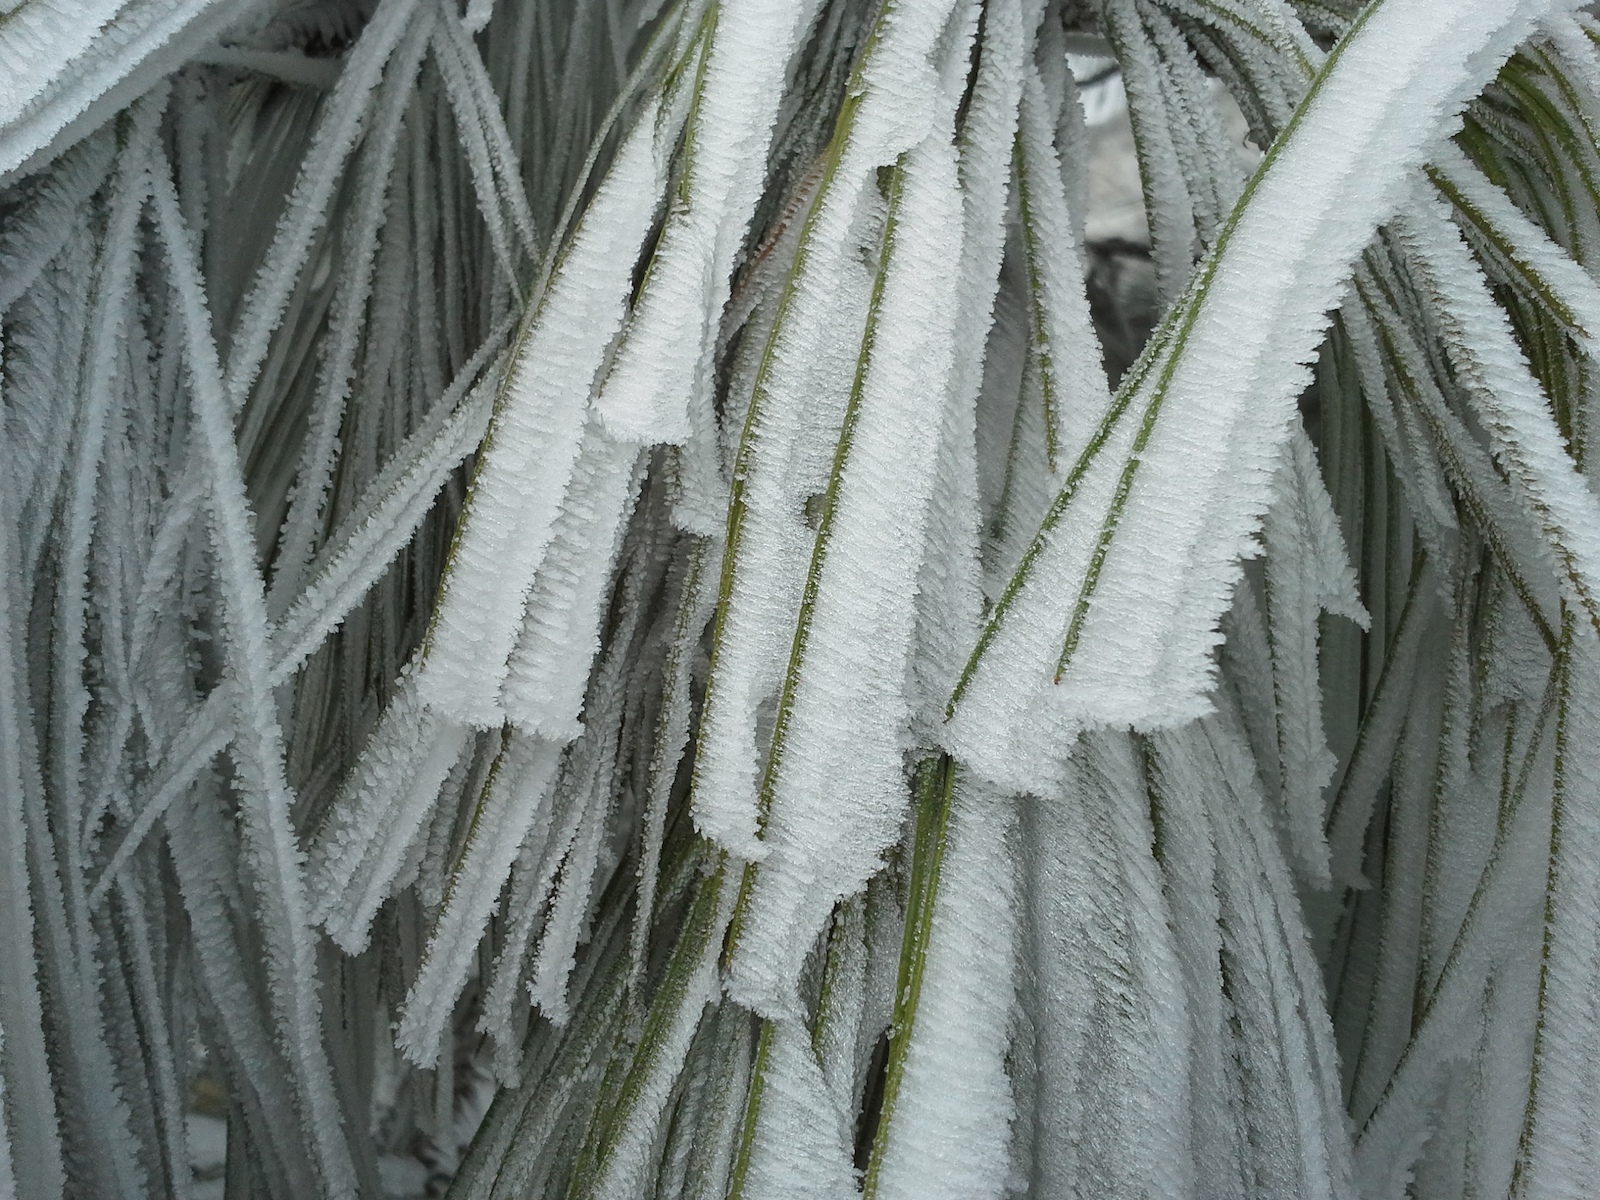 Ribbons of ice crystals due to freezing fog